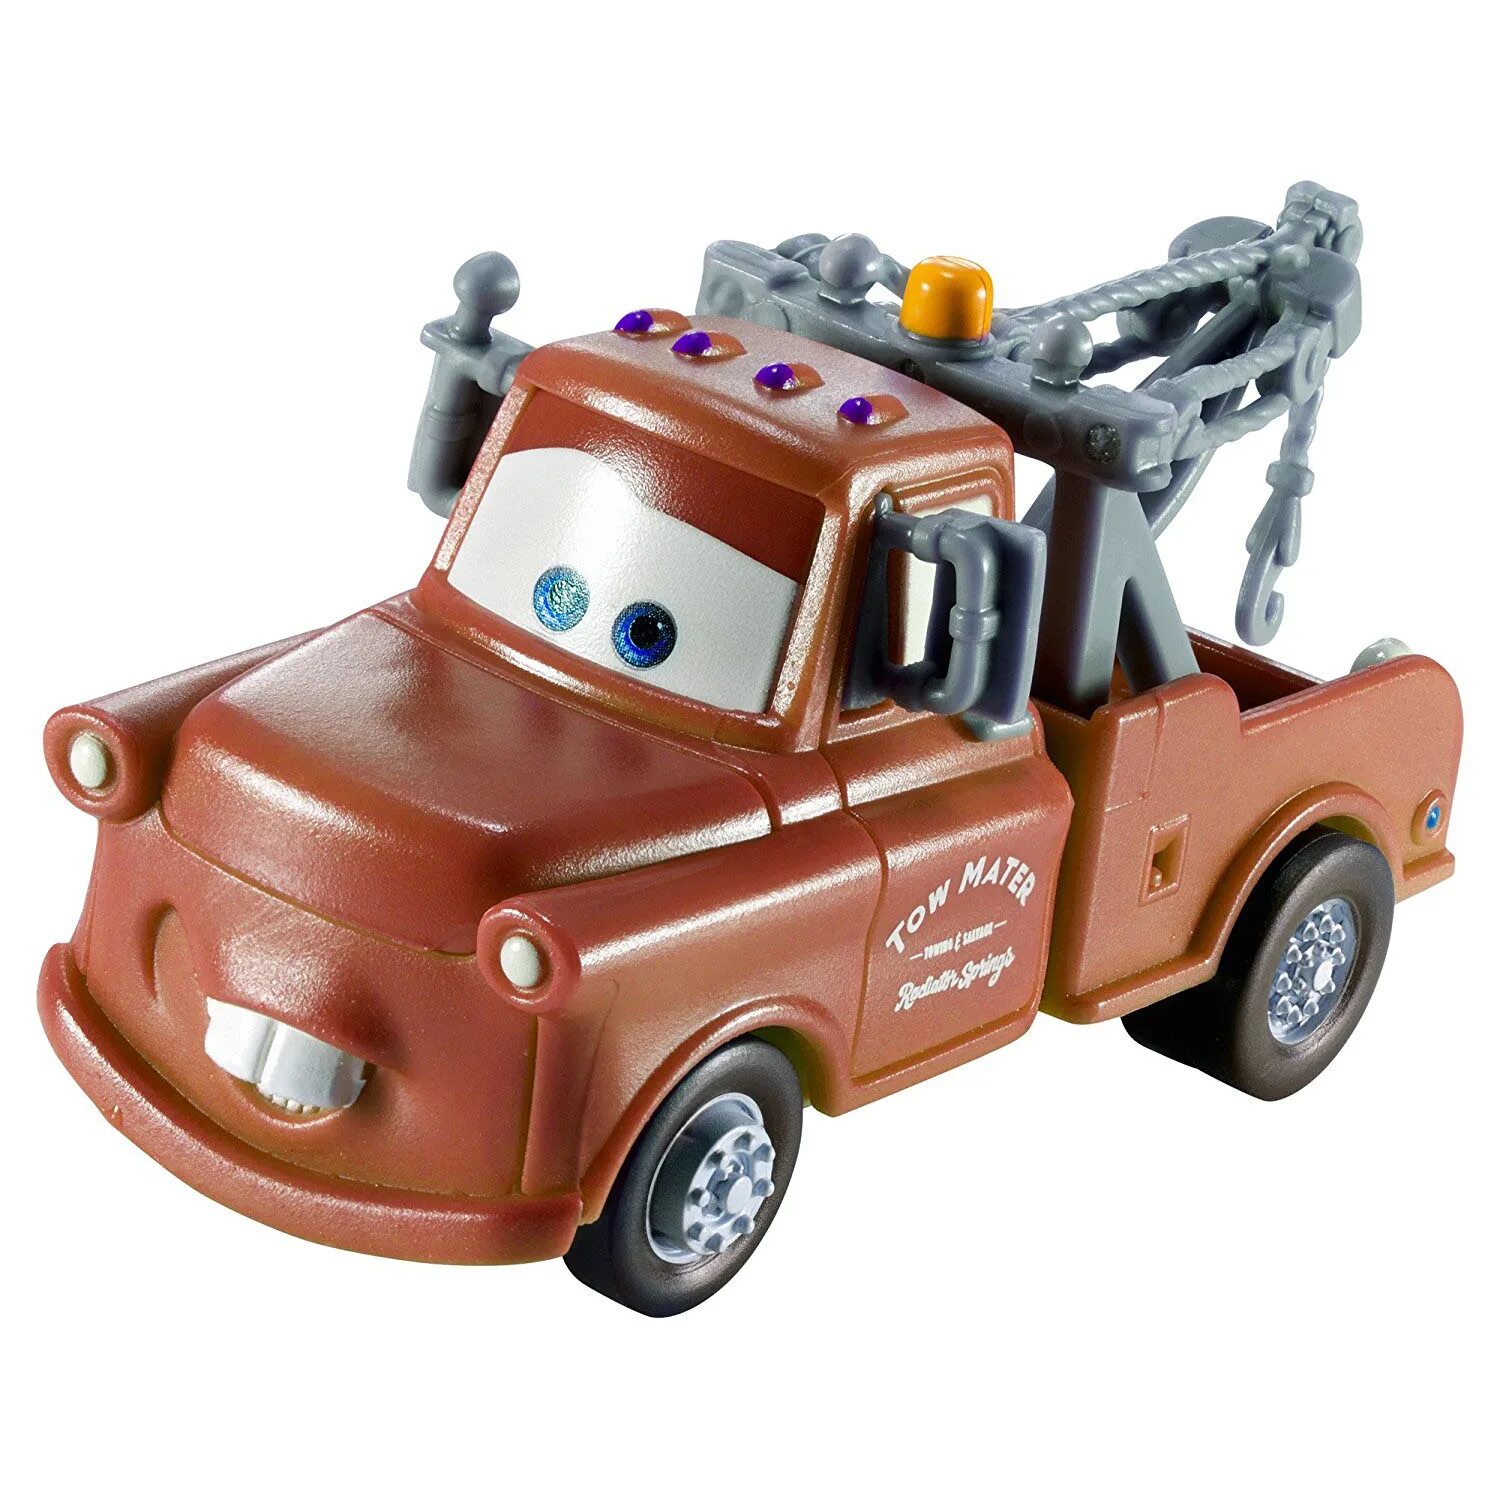 Truck toy cars. Машинка cars Мэтр Mattel. Тачки 2 Мэтр машинка. Машинка cars Color Changers. Cars машинка Deluxe Мэтр.